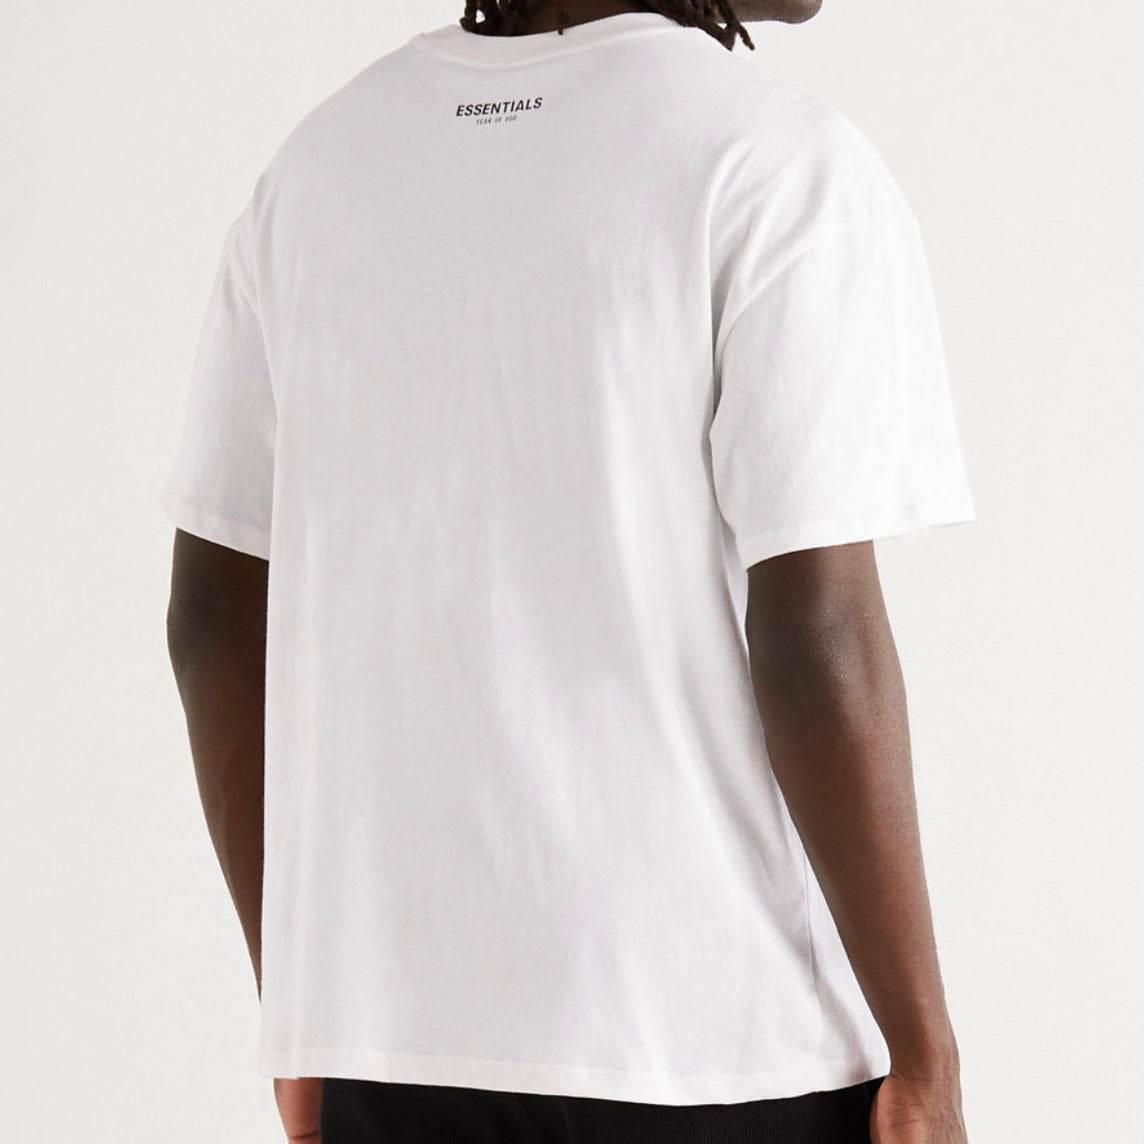 Fear of God Essentials 3-Pack T-Shirts White